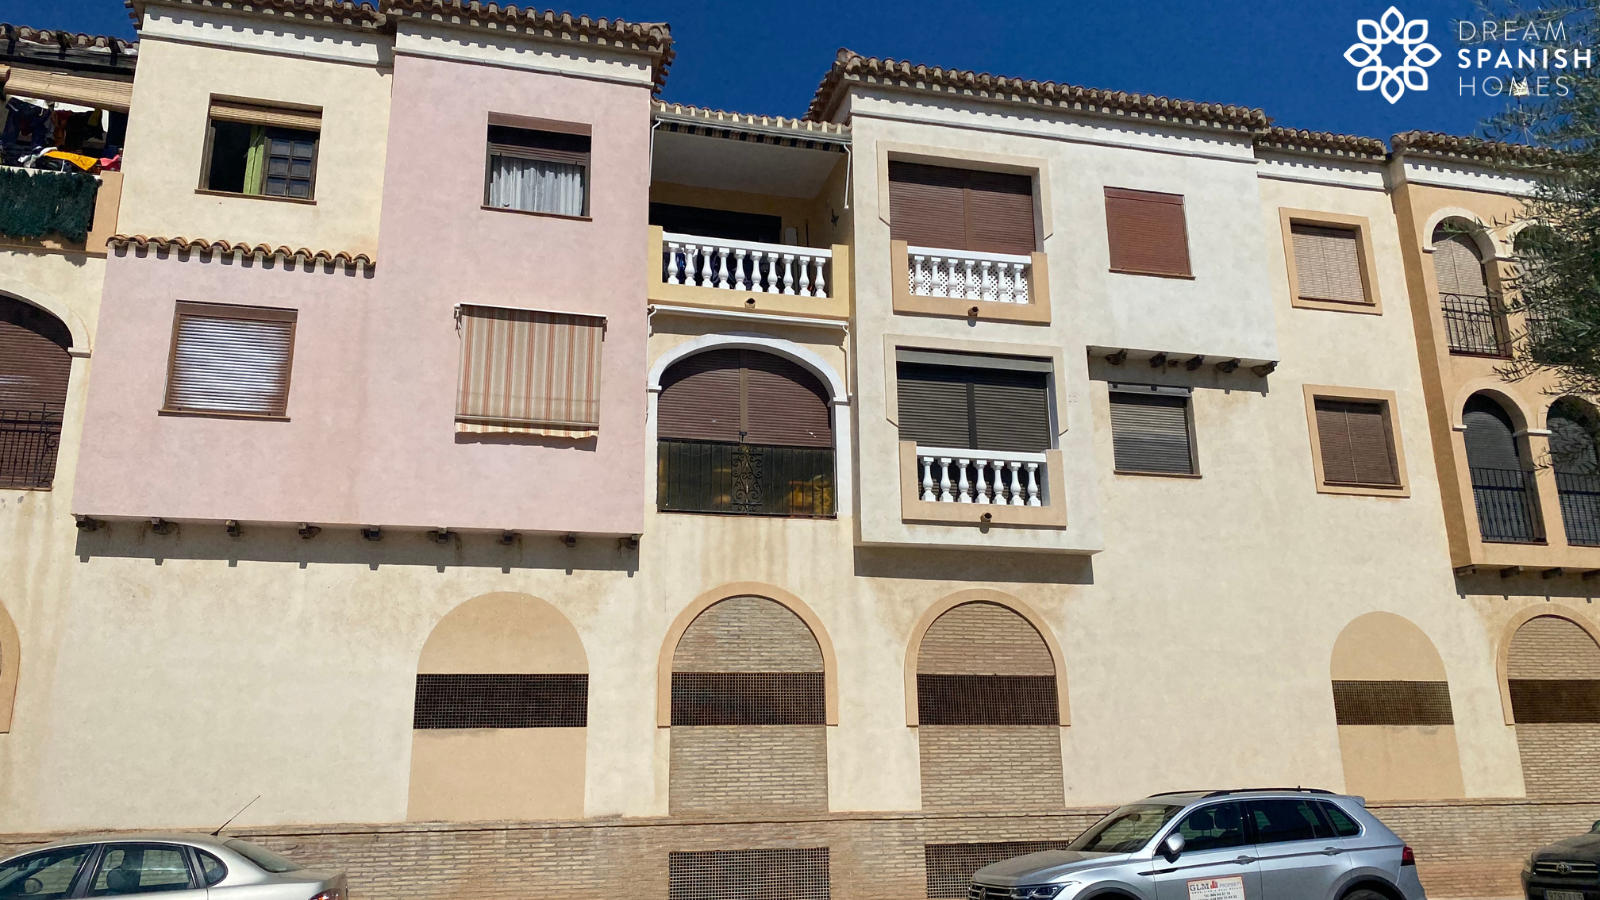 Apartment 2 Bedrooms, 1 Bathroom Including Parking 100m From The Beach 1